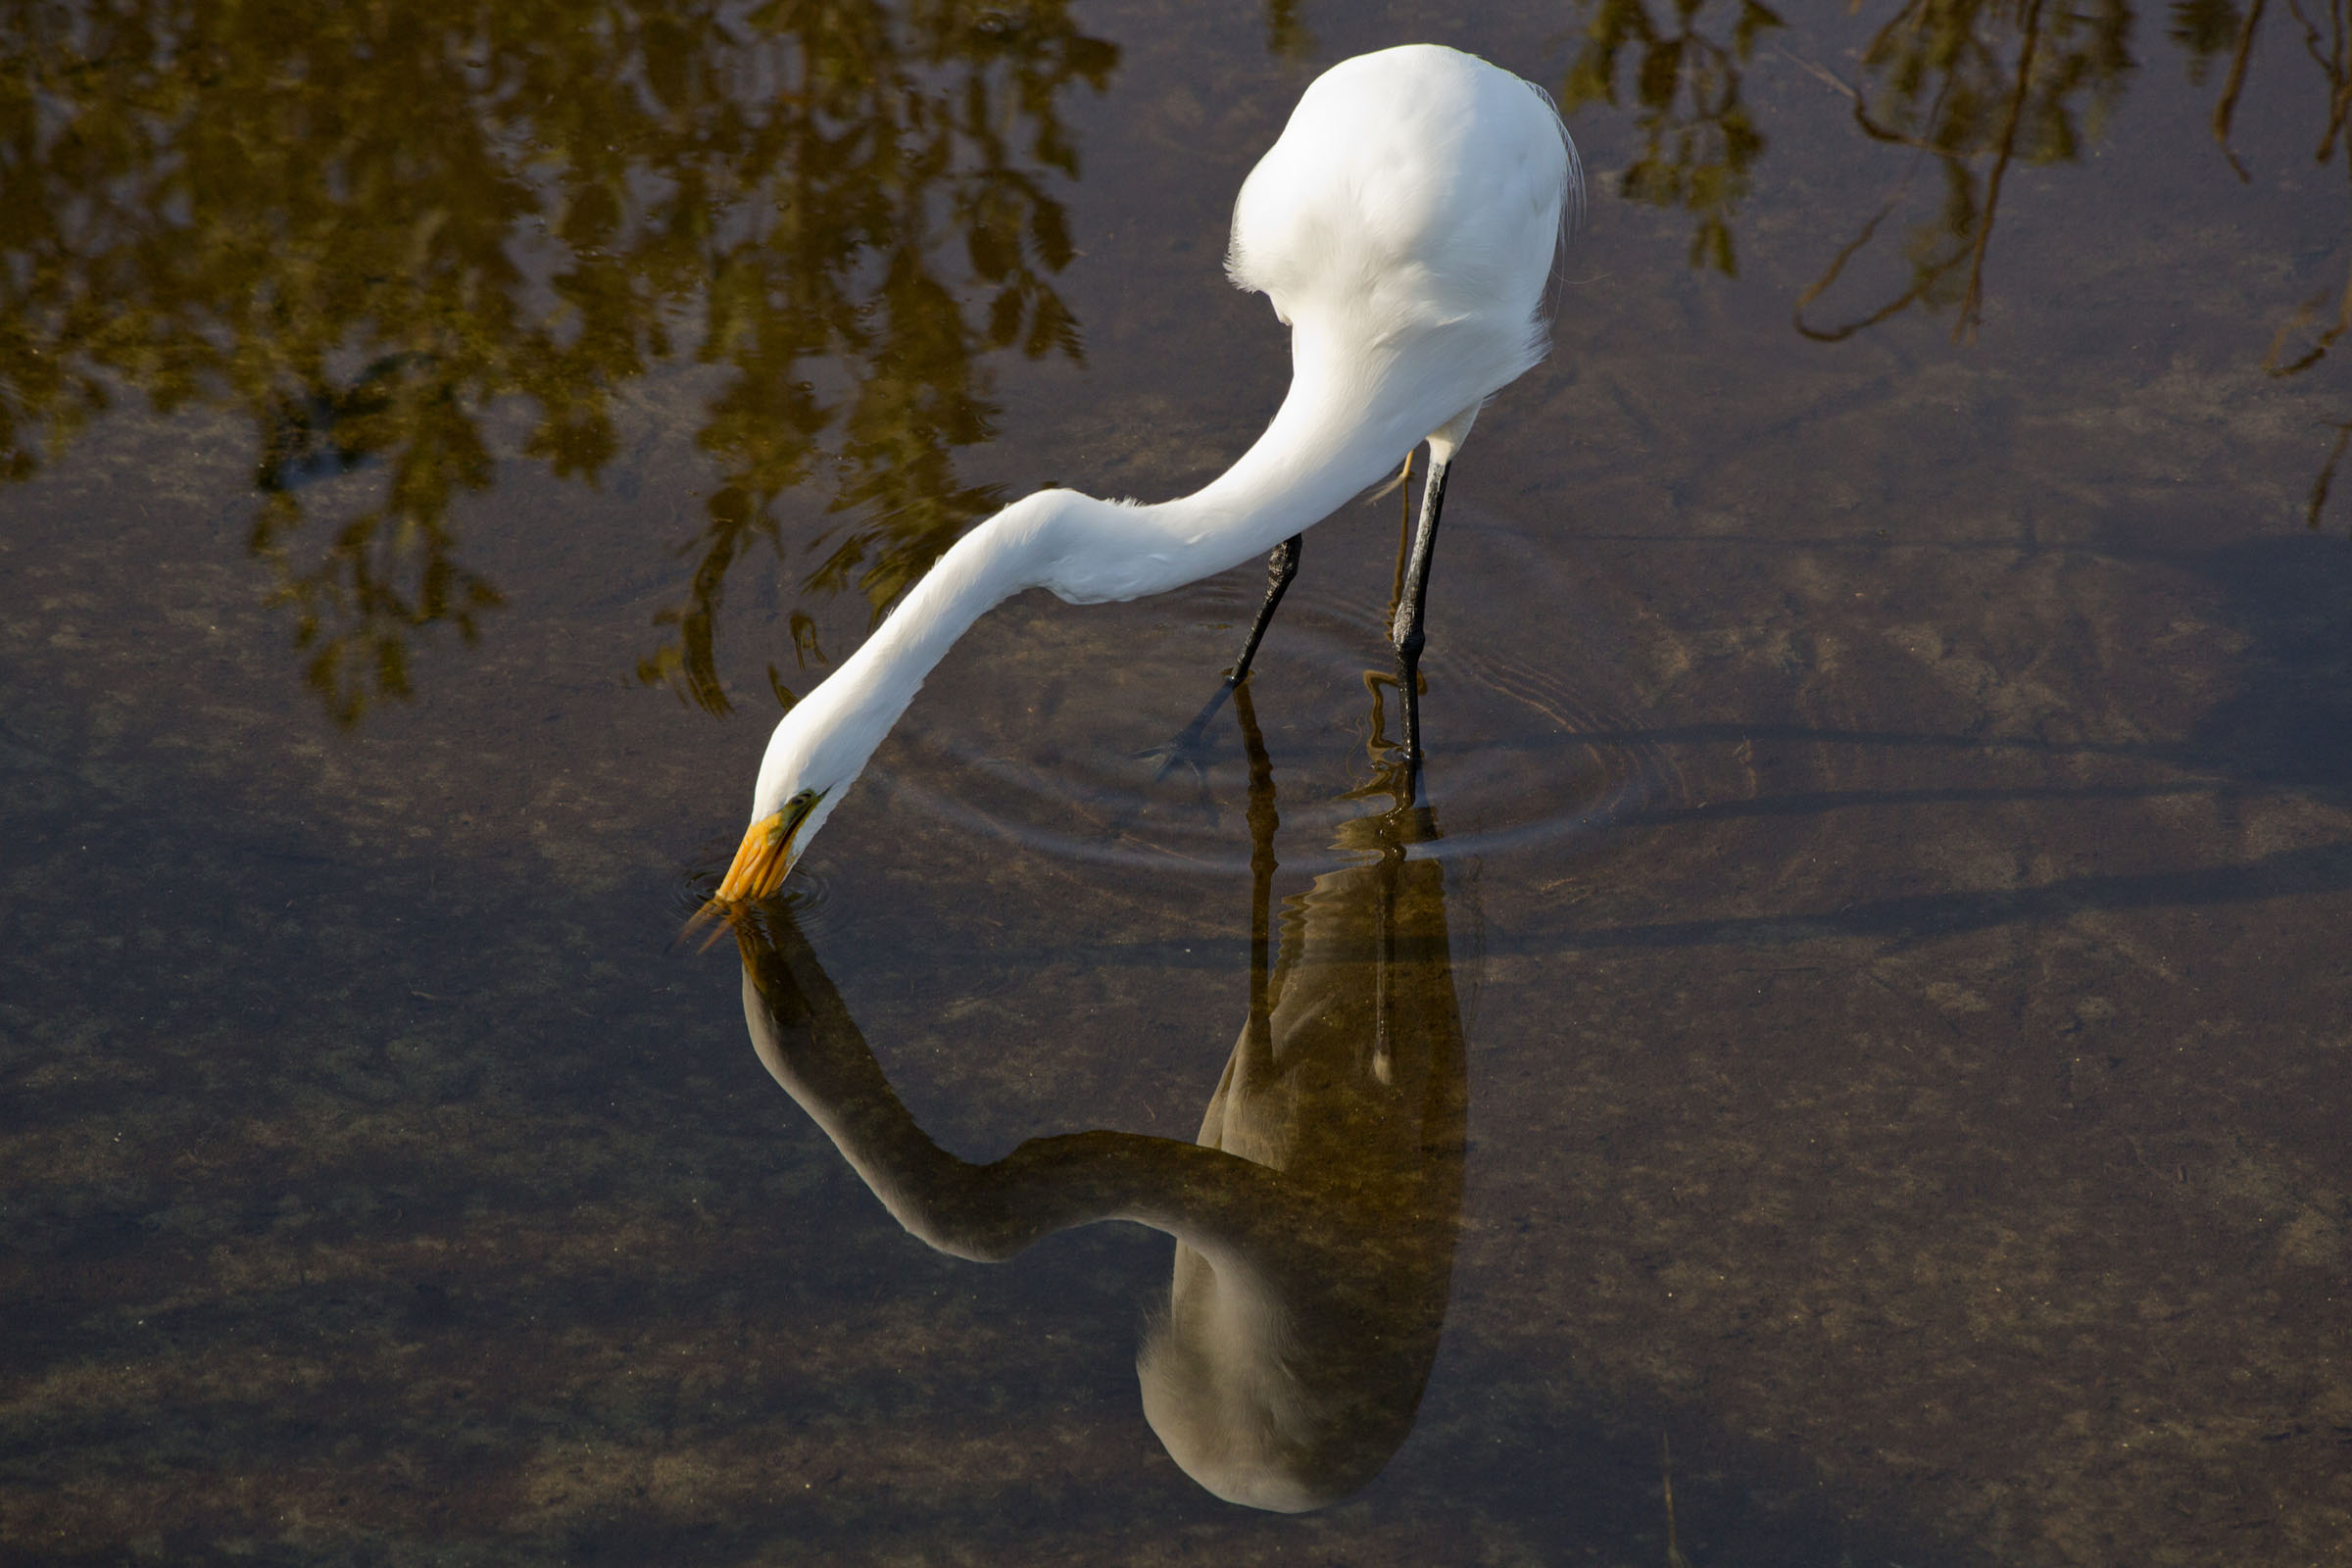 A white bird drinks from a pool of water